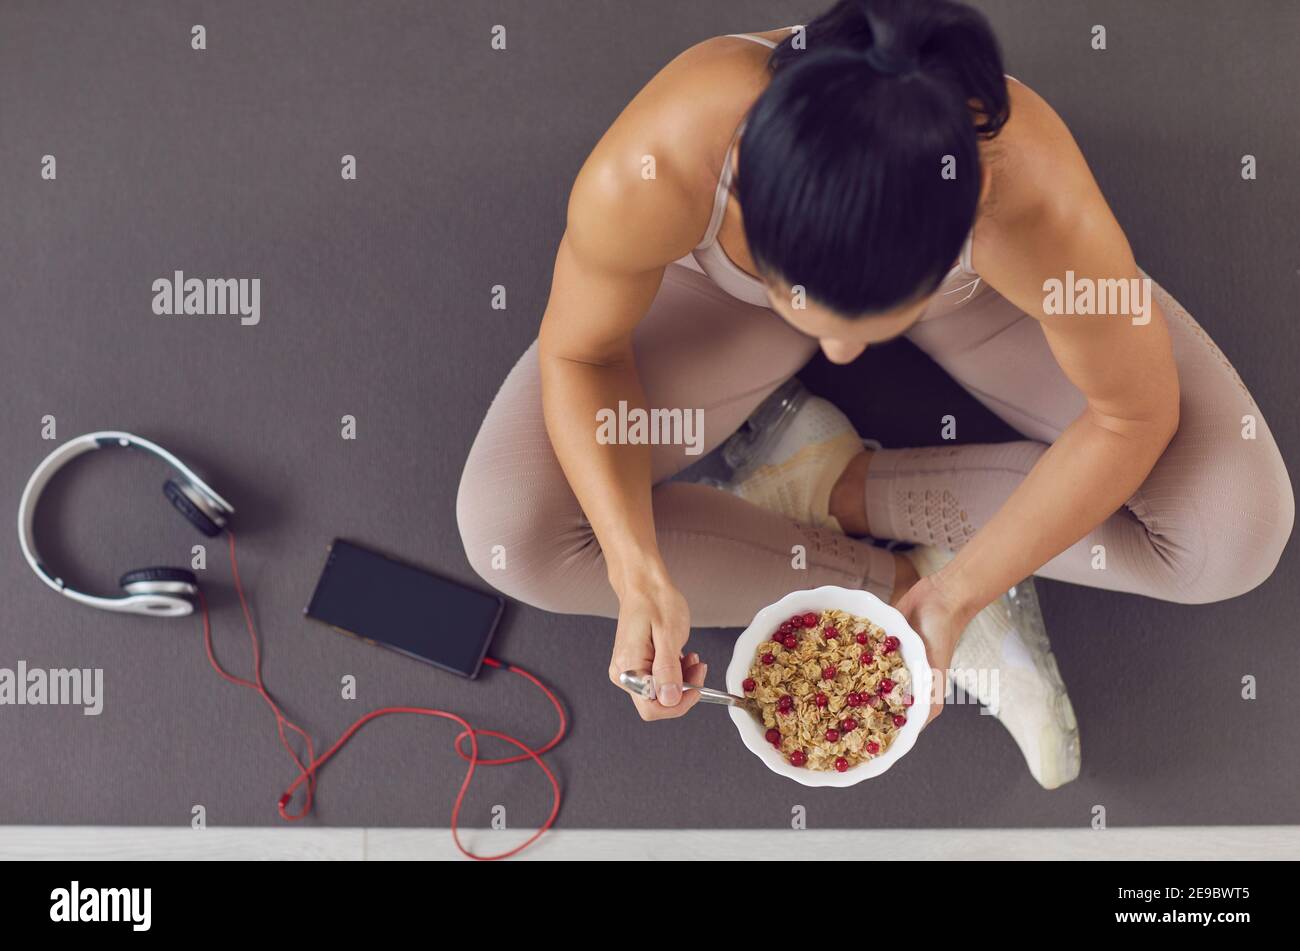 Top view of fit woman sitting on exercise mat and having healthy meal after workout at home Stock Photo